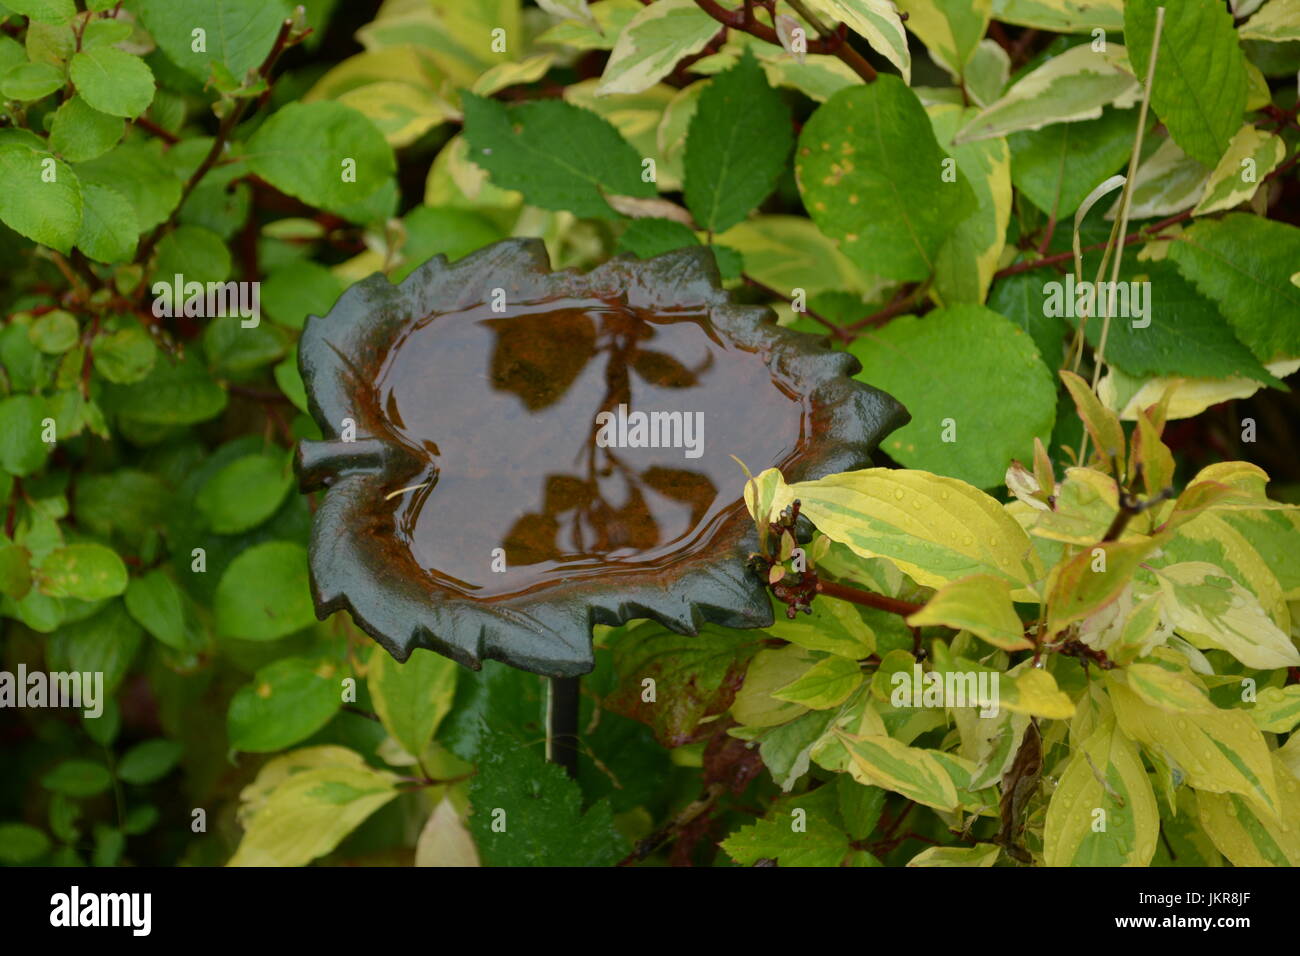 Close up of small decorative leaf shaped ornamental metal verdigris water filled bird bath attached to a metal stake surrounded by evergreen shrubs Stock Photo